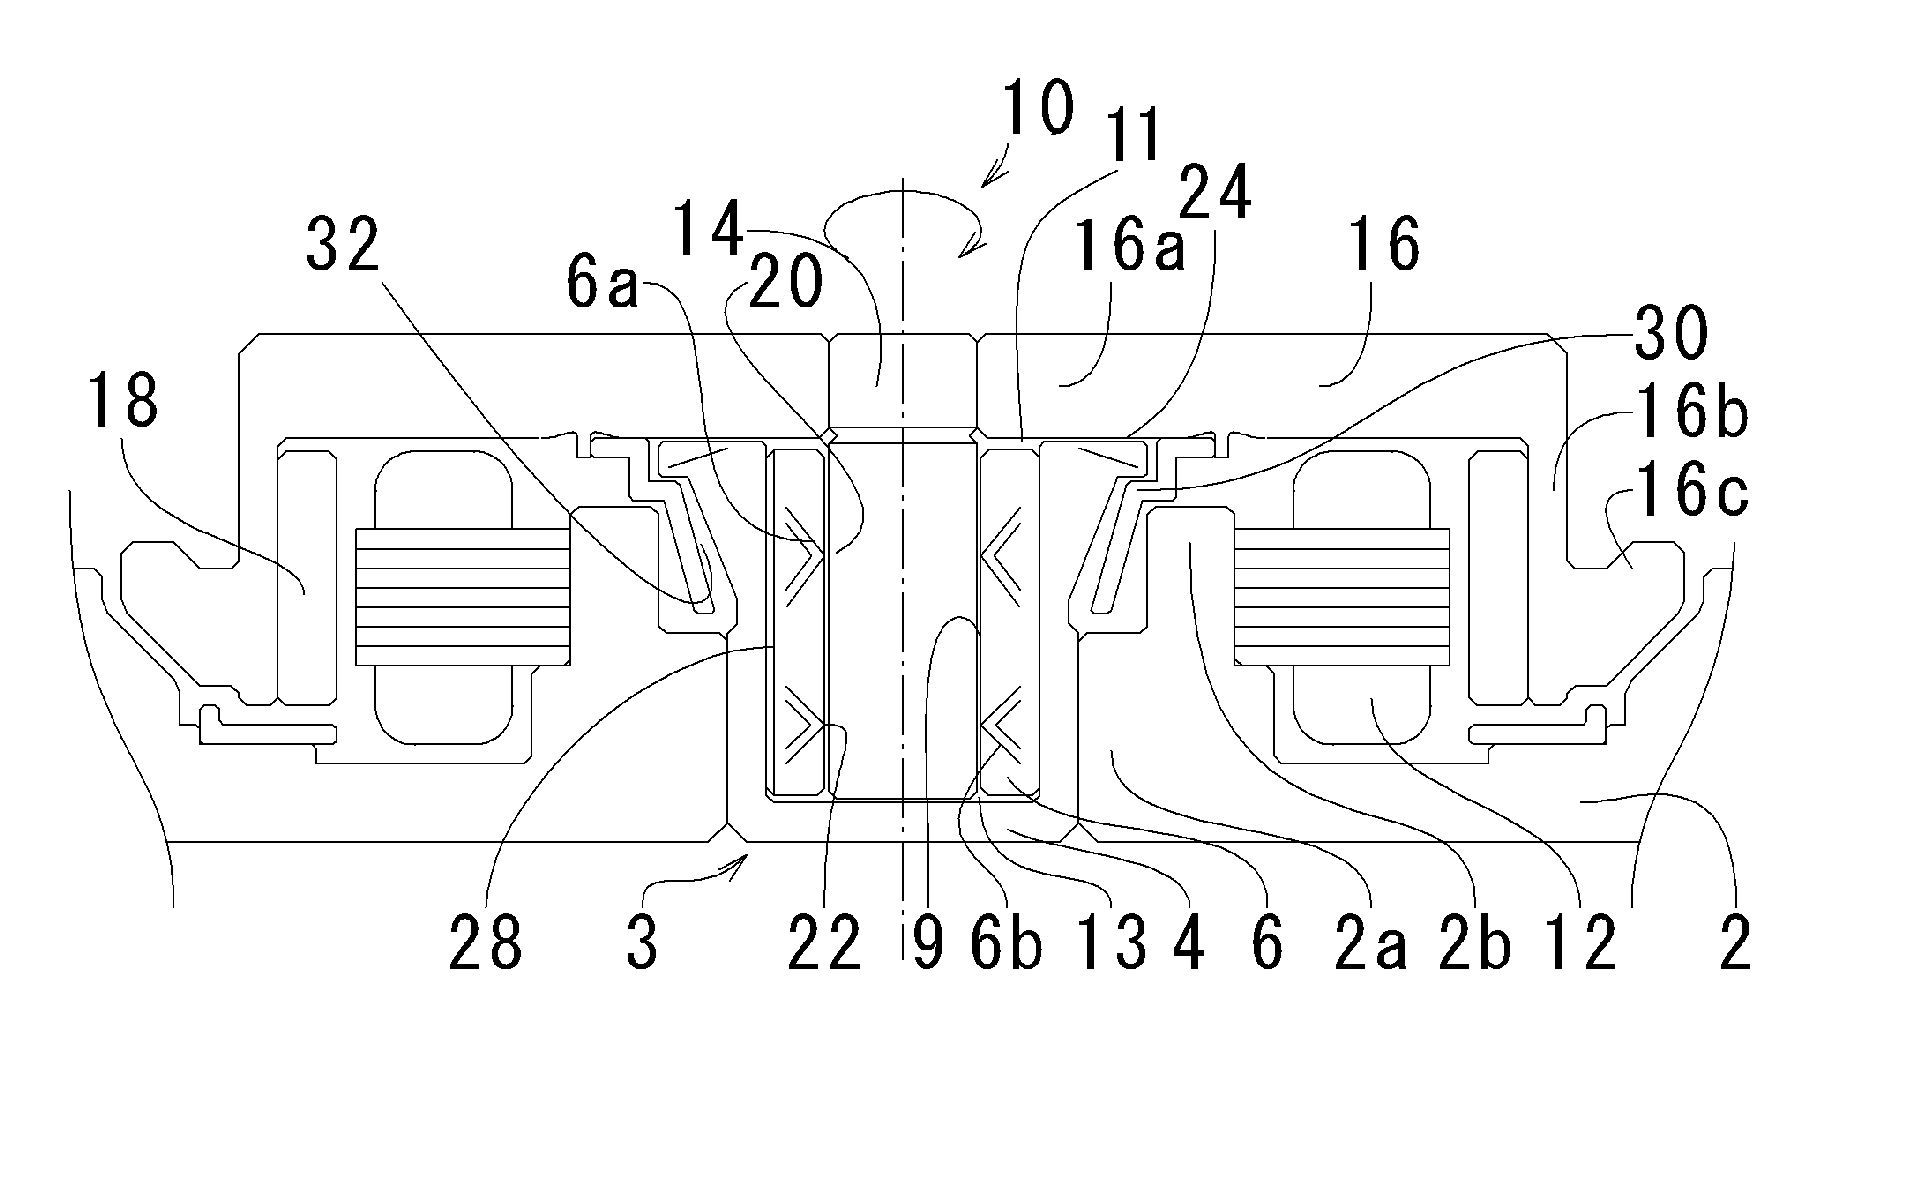 Fluid Dynamic Pressure Bearing, Spindle Motor Provided with Fluid Dynamic Pressure Bearing, and Recording Disk Drive Device Provided with Spindle Motor